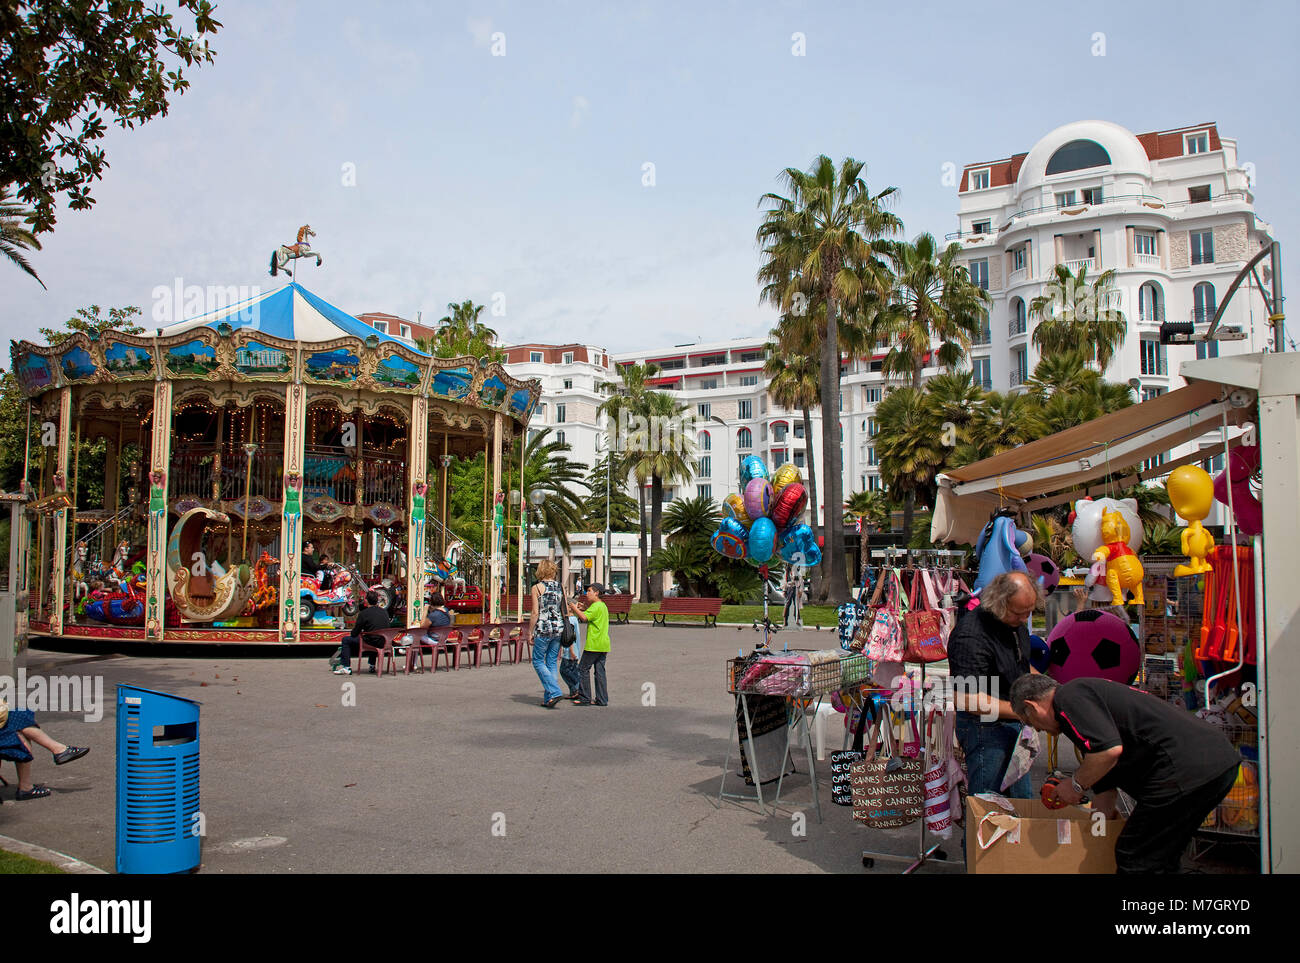 Historical children's merry-go-round at Boulevard La Croisette, Cannes, french riviera, South France, France, Europe Stock Photo